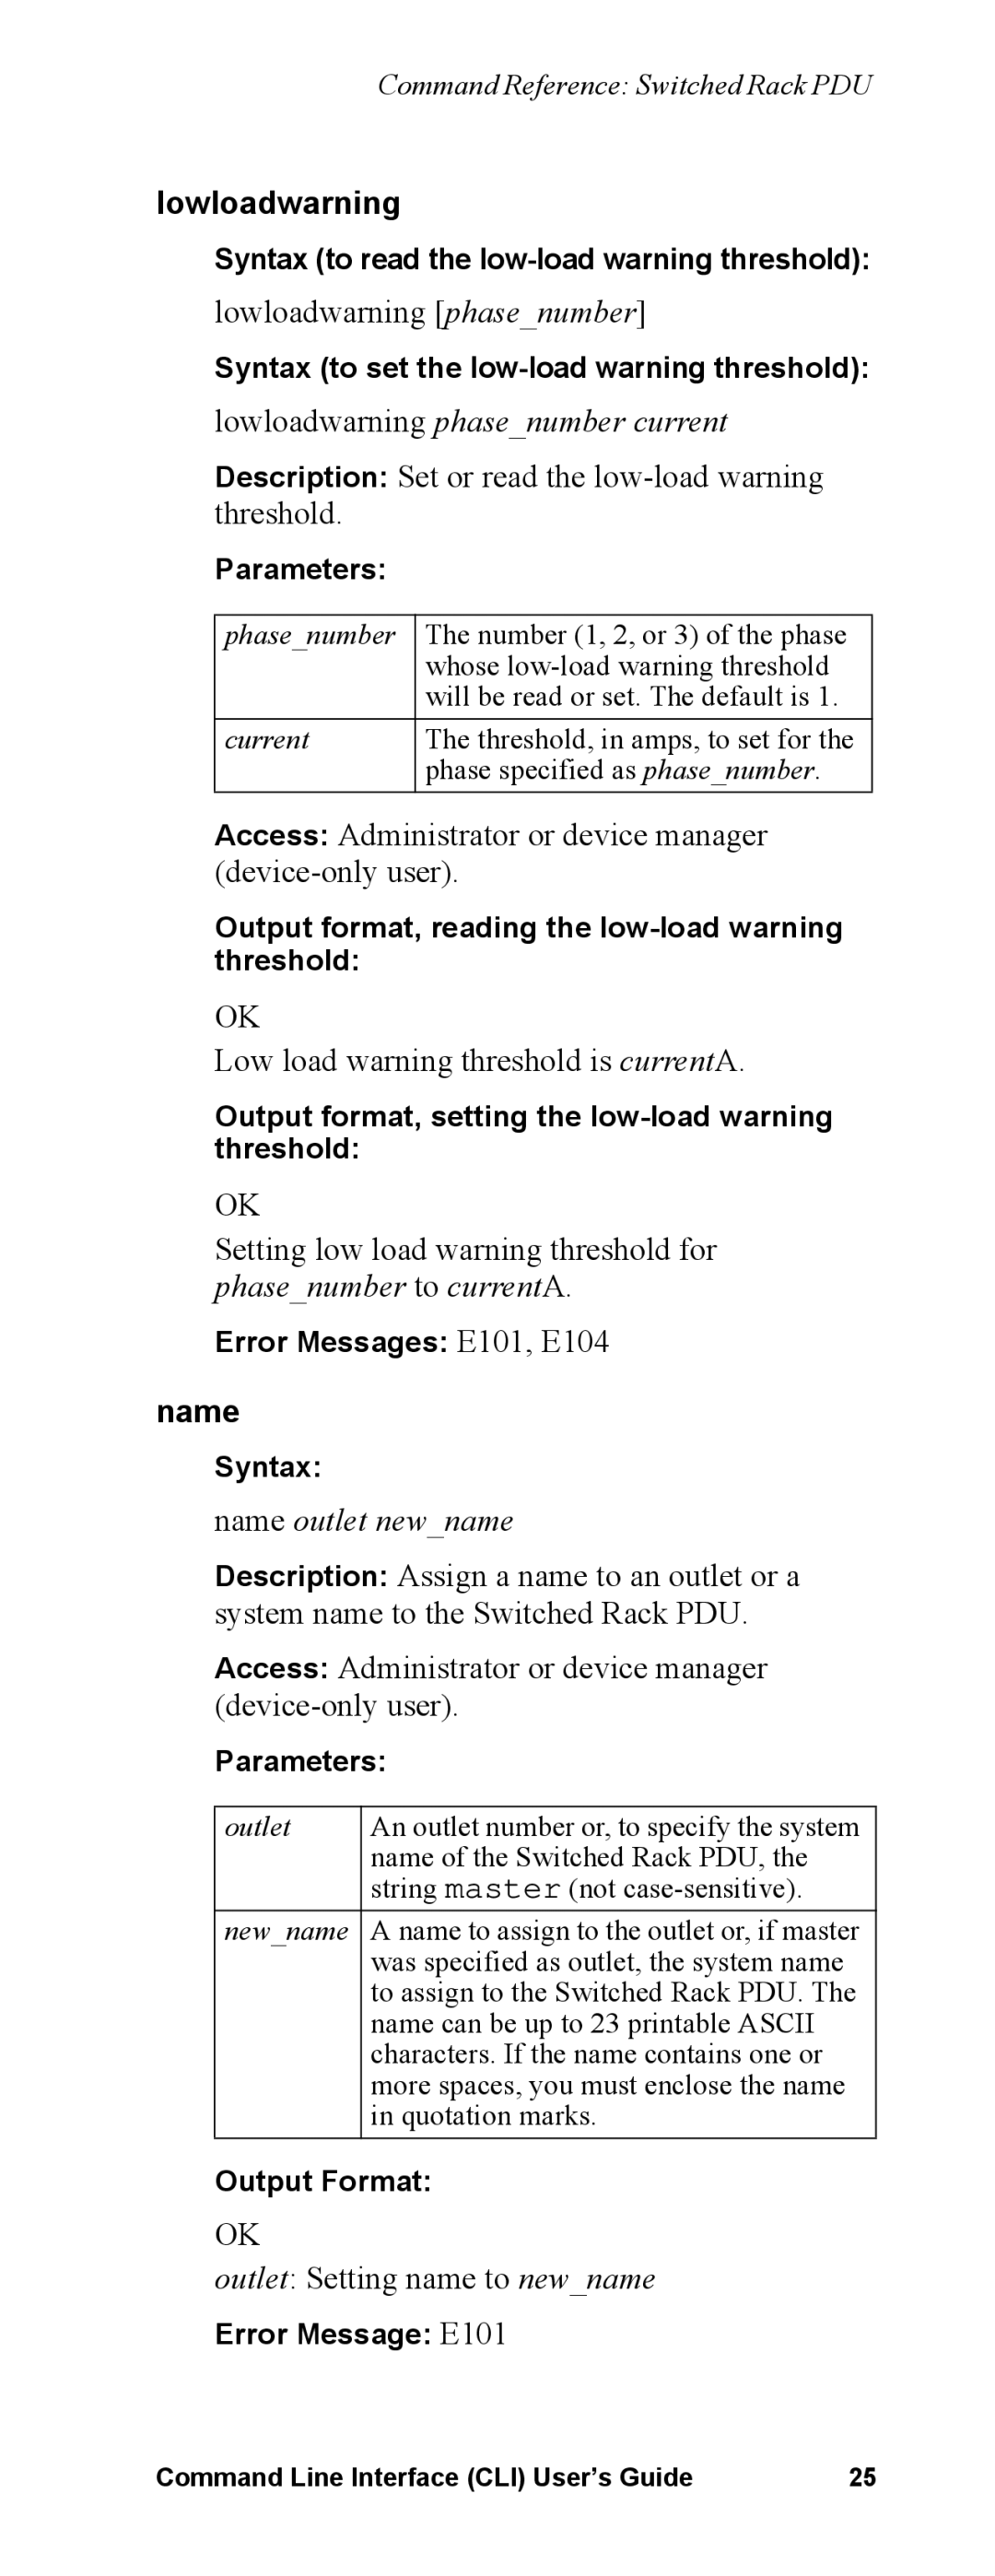 APC Command Line Interface manual Lowloadwarning phasenumber current, Name outlet newname 